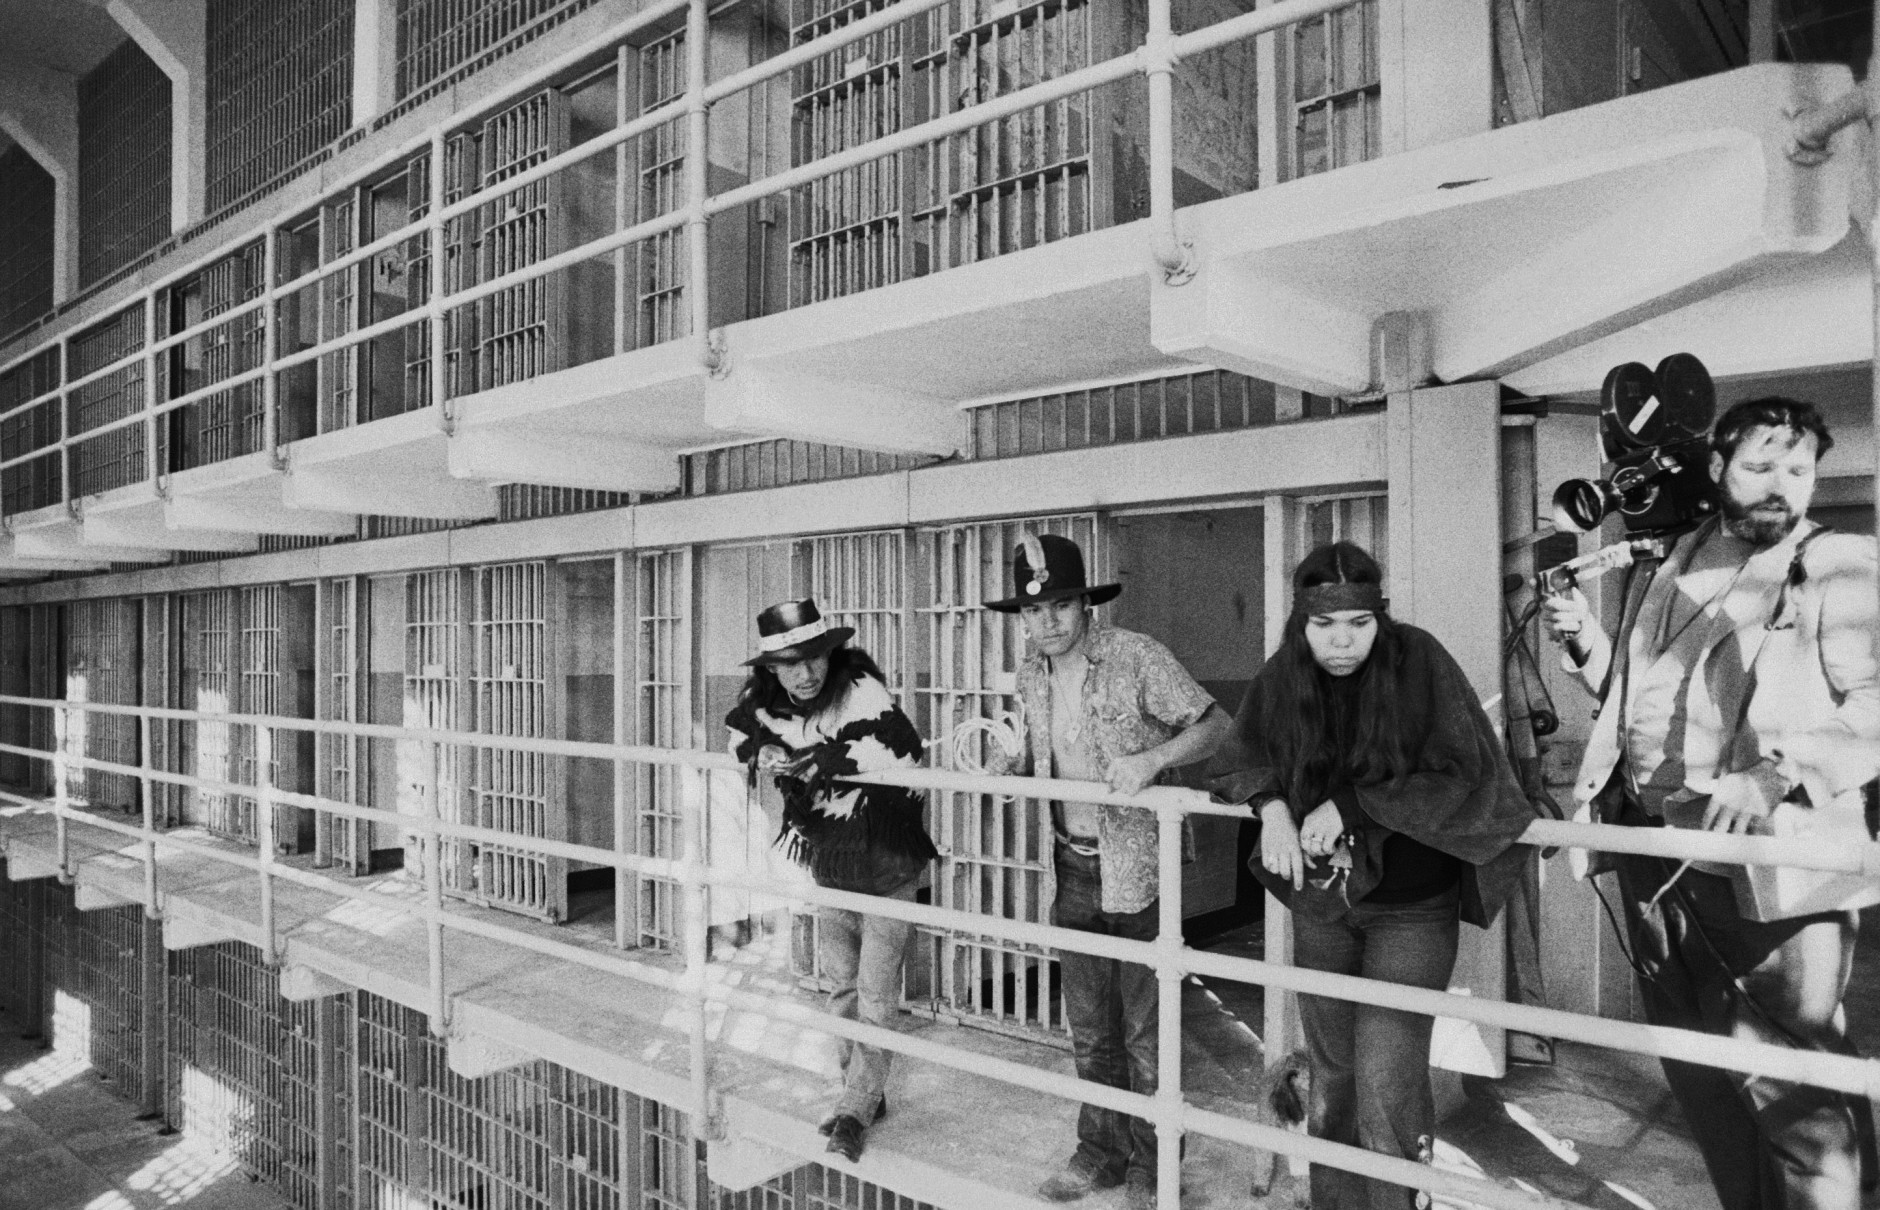 Part of a band of American Indians look over the main cell block of Alcatraz after occupying the island for the second time in two weeks in San Francisco on Nov. 19, 1969. The Indians say they want the island for a new Indian center to replace a San Francisco building destroyed by fire. The General Service Administration asked the Indians to leave but threatened no immediate action. (AP Photo/RWK)